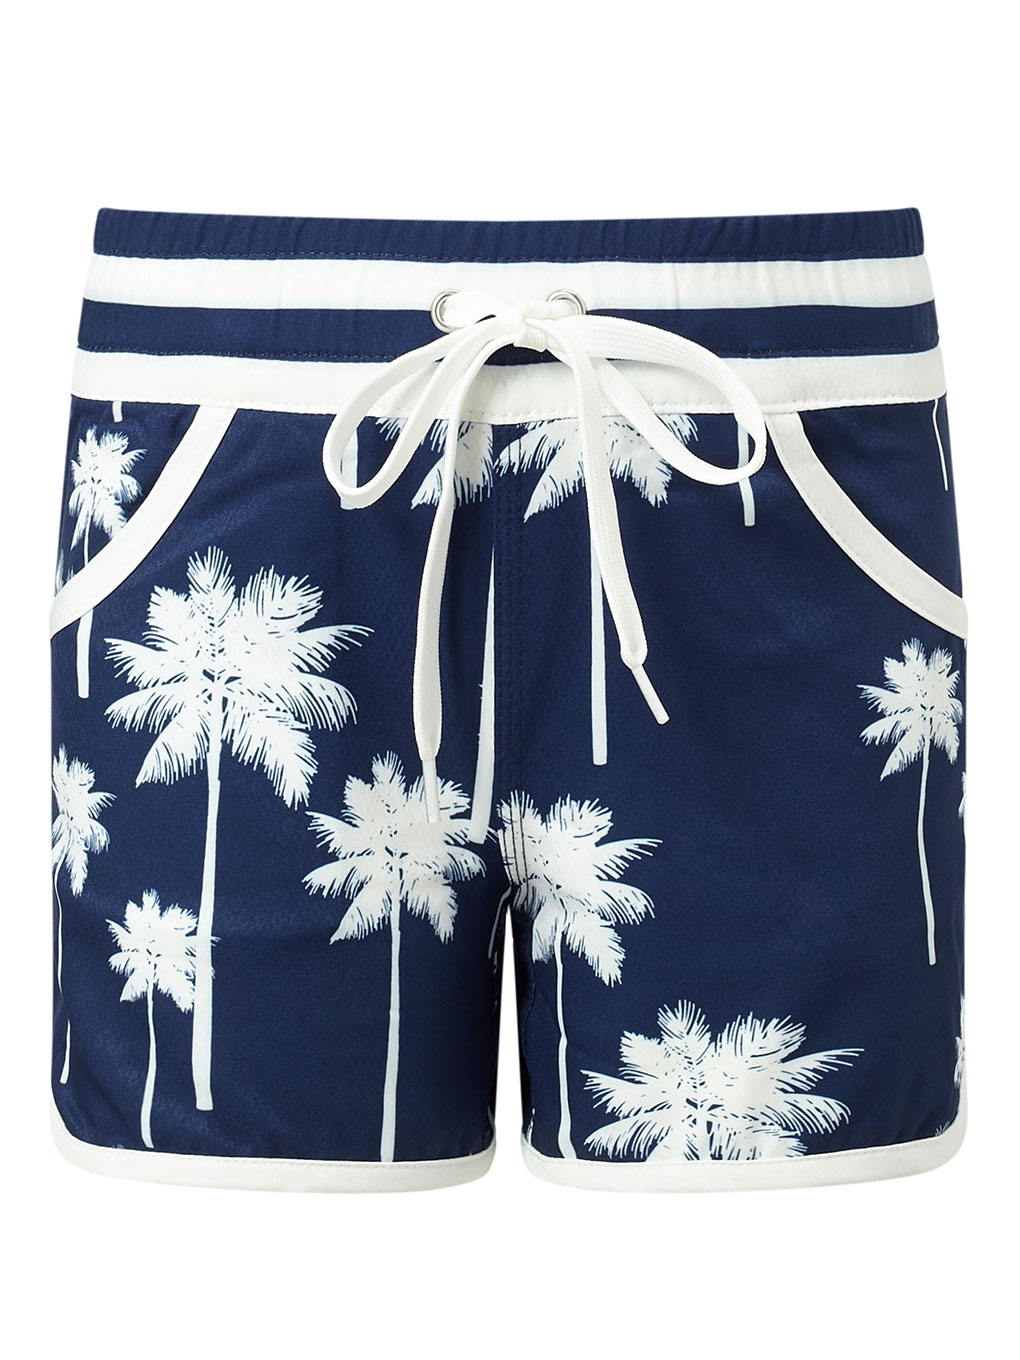 Perfect Moment Palm Resort Shorts Y12 In Navy-white-palm-print